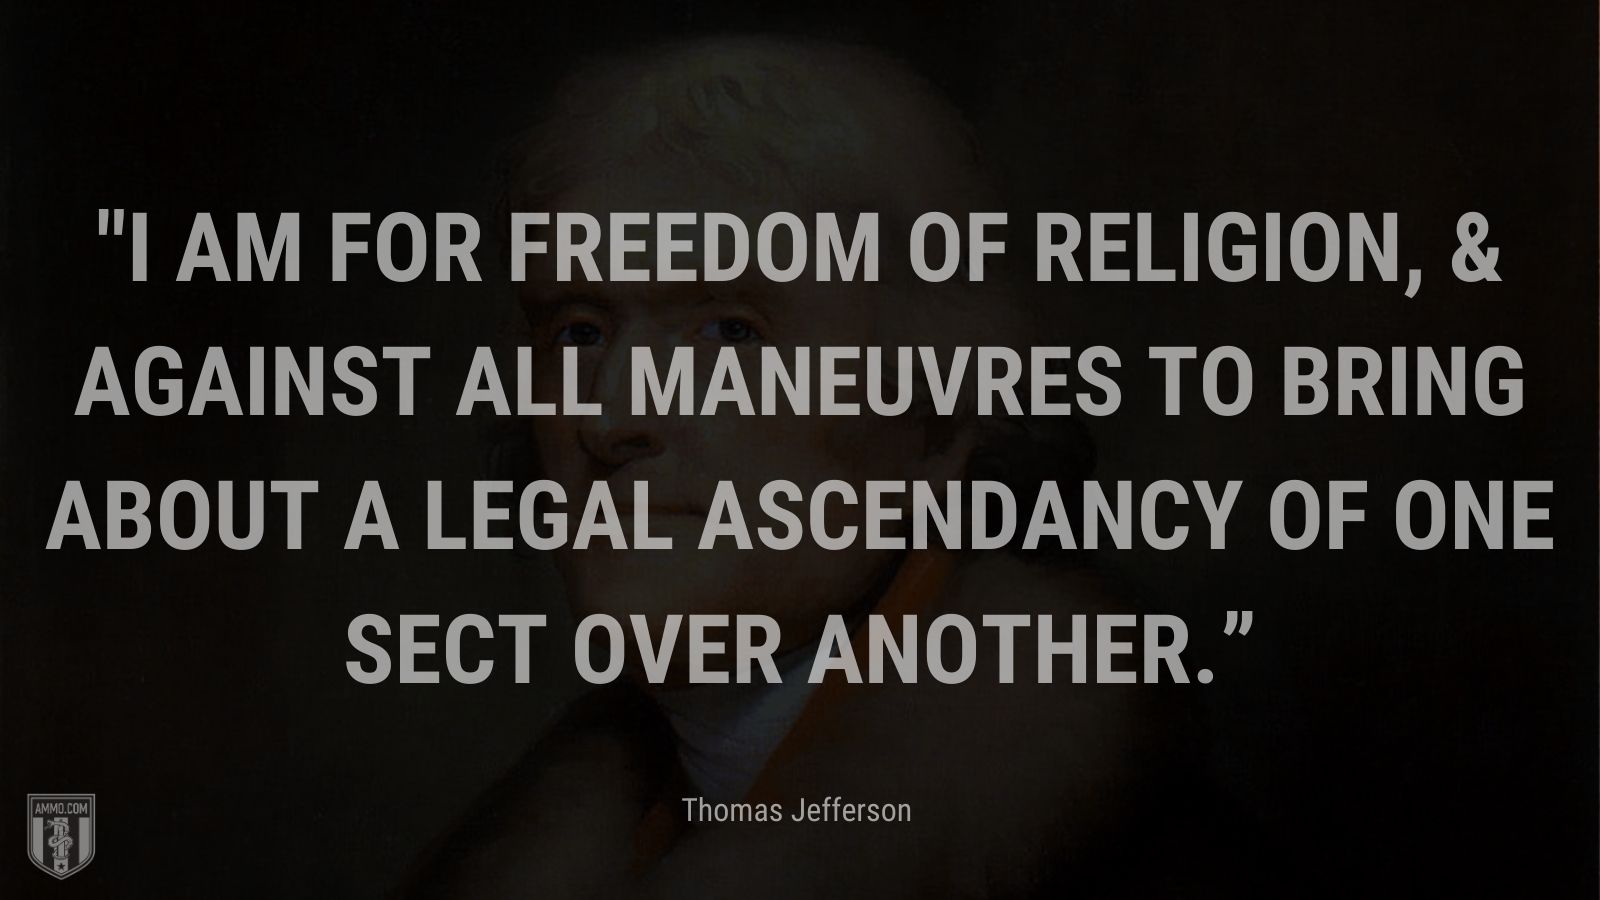 “I am for freedom of religion, & against all maneuvres to bring about a legal ascendancy of one sect over another.” - Thomas Jefferson